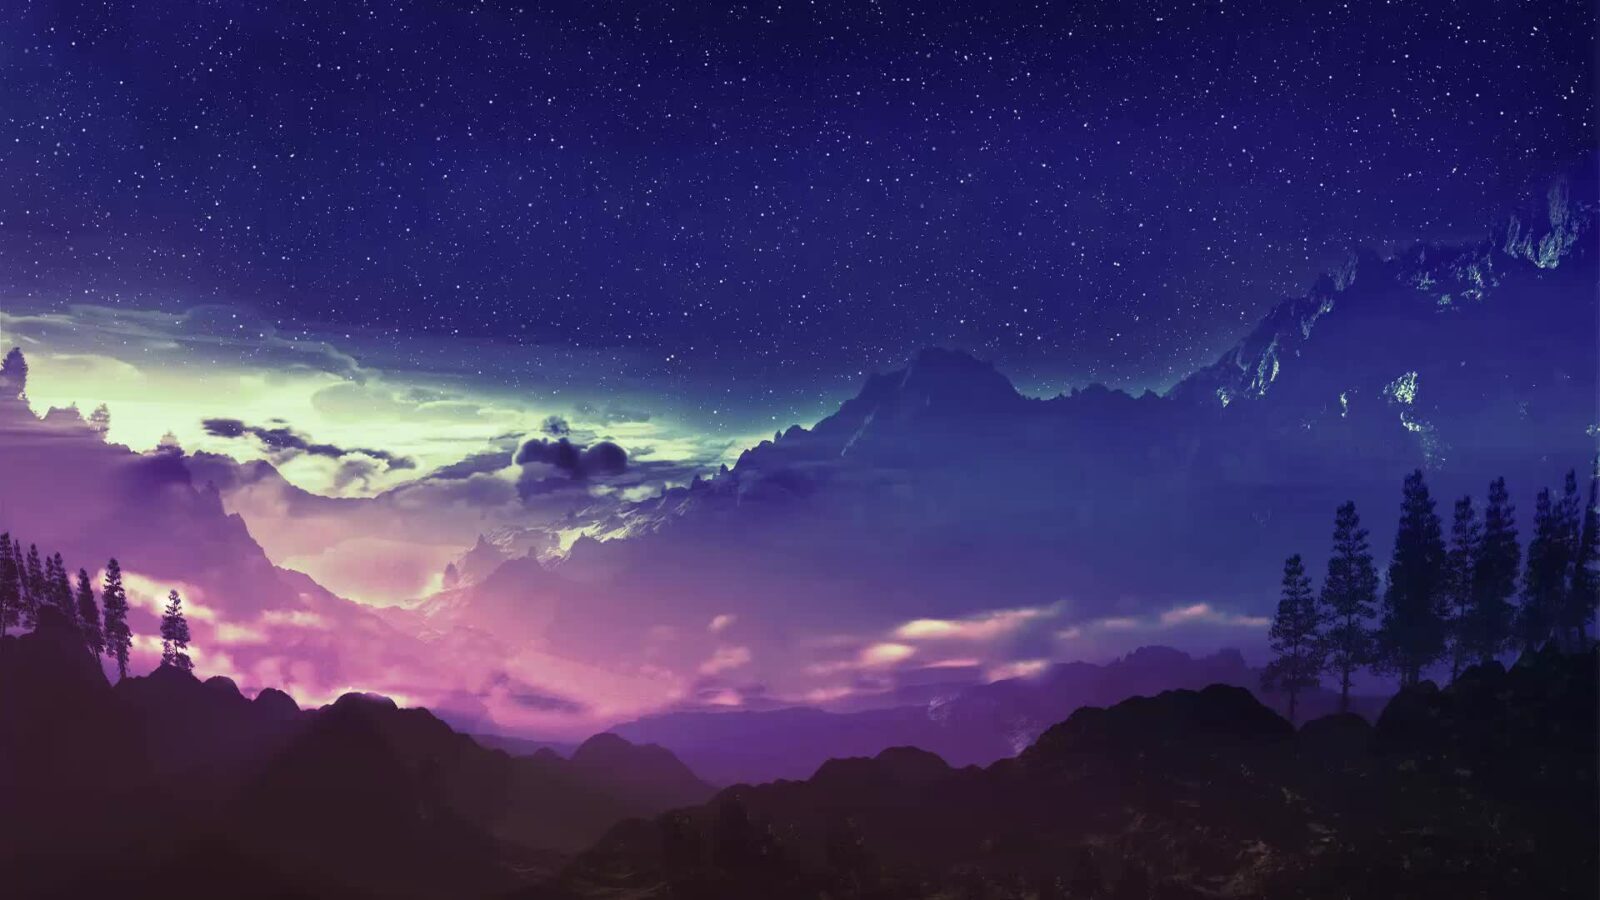 LiveWallpapers4Free.com | Mountain With Stars Beautiful Nature - Free Animated Wallpaper